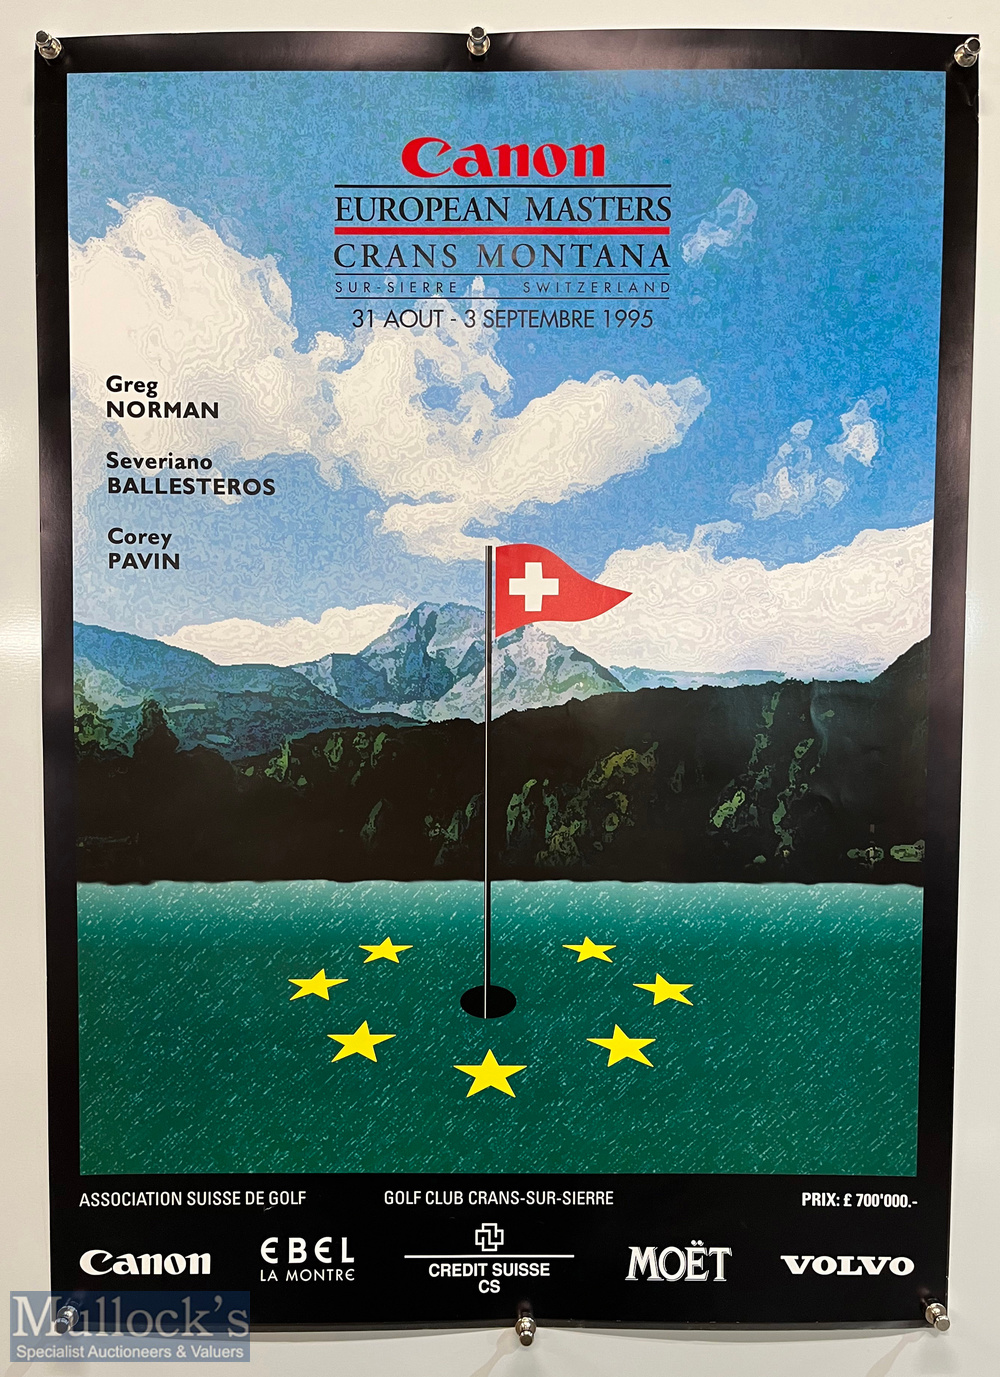 1987-1995 Ebel Golf Open Switzerland Posters, 1987, 1990, 1992, 1995, with some signs of wear - size - Image 3 of 4